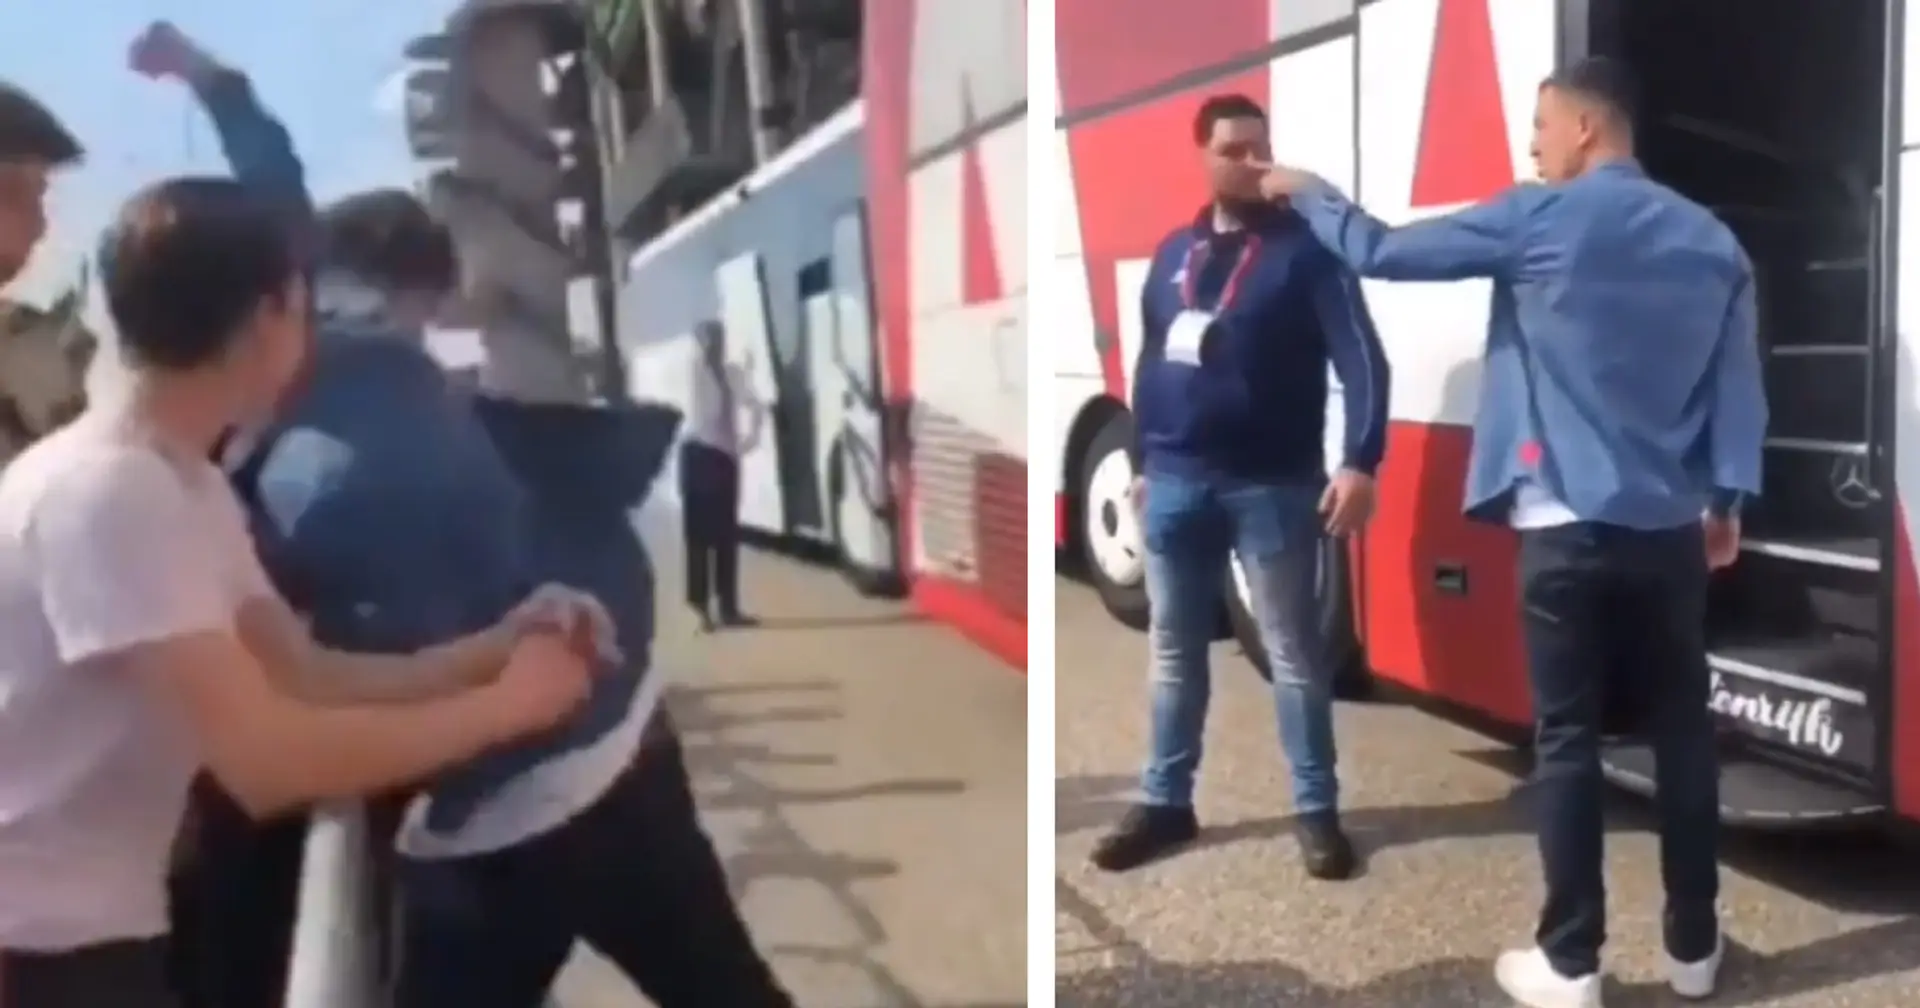 Ajax's Steven Berghuis punches fan after 3-1 defeat